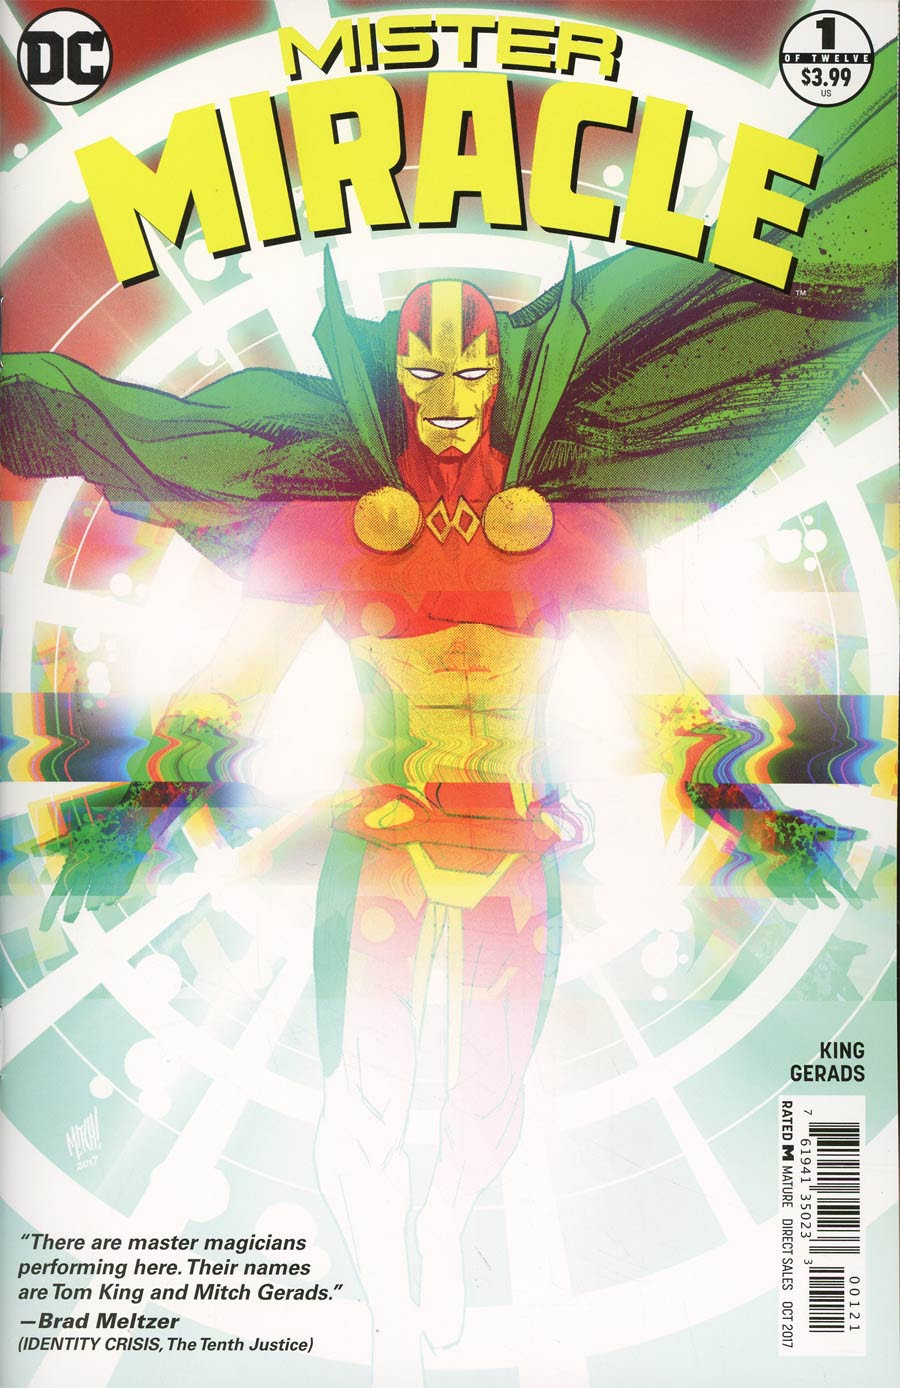 Mister Miracle by Tom King and Mitch Gerads